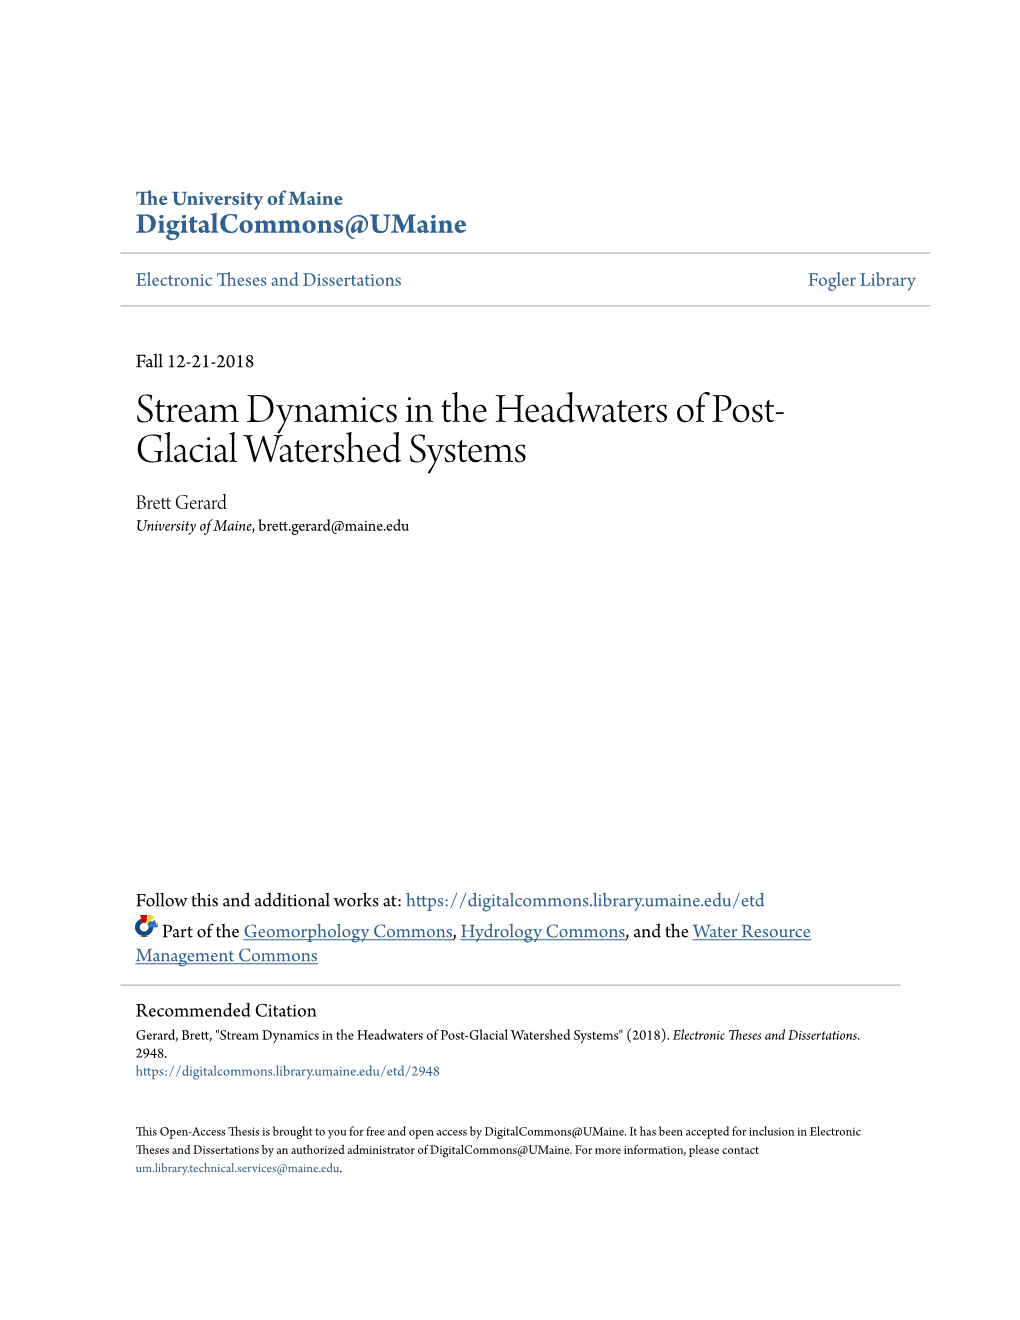 Stream Dynamics in the Headwaters of Post-Glacial Watershed Systems" (2018)